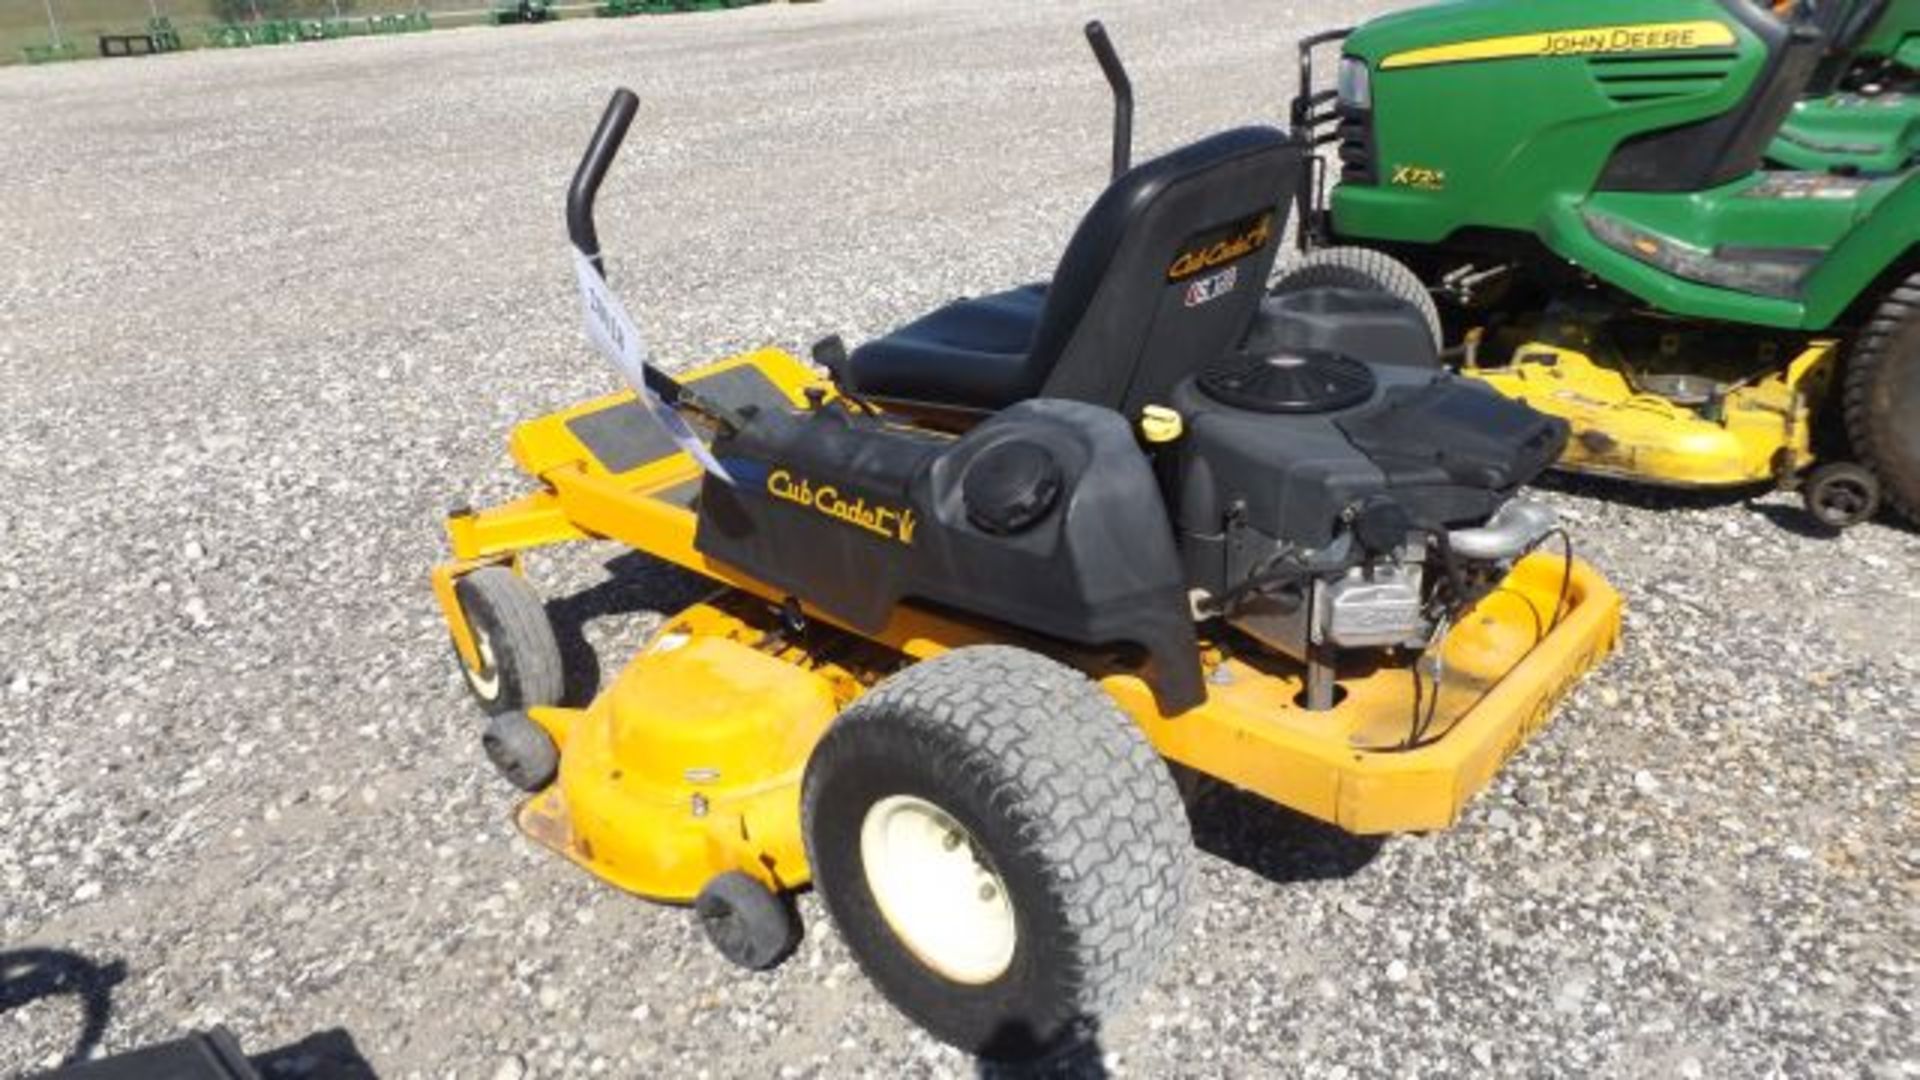 2010 Cub Cadet S50 RZT Mower #12299, 587 hrs, 50" Deck, 24hp Briggs, Air Cooled, sn#IK174G20028 - Image 3 of 3